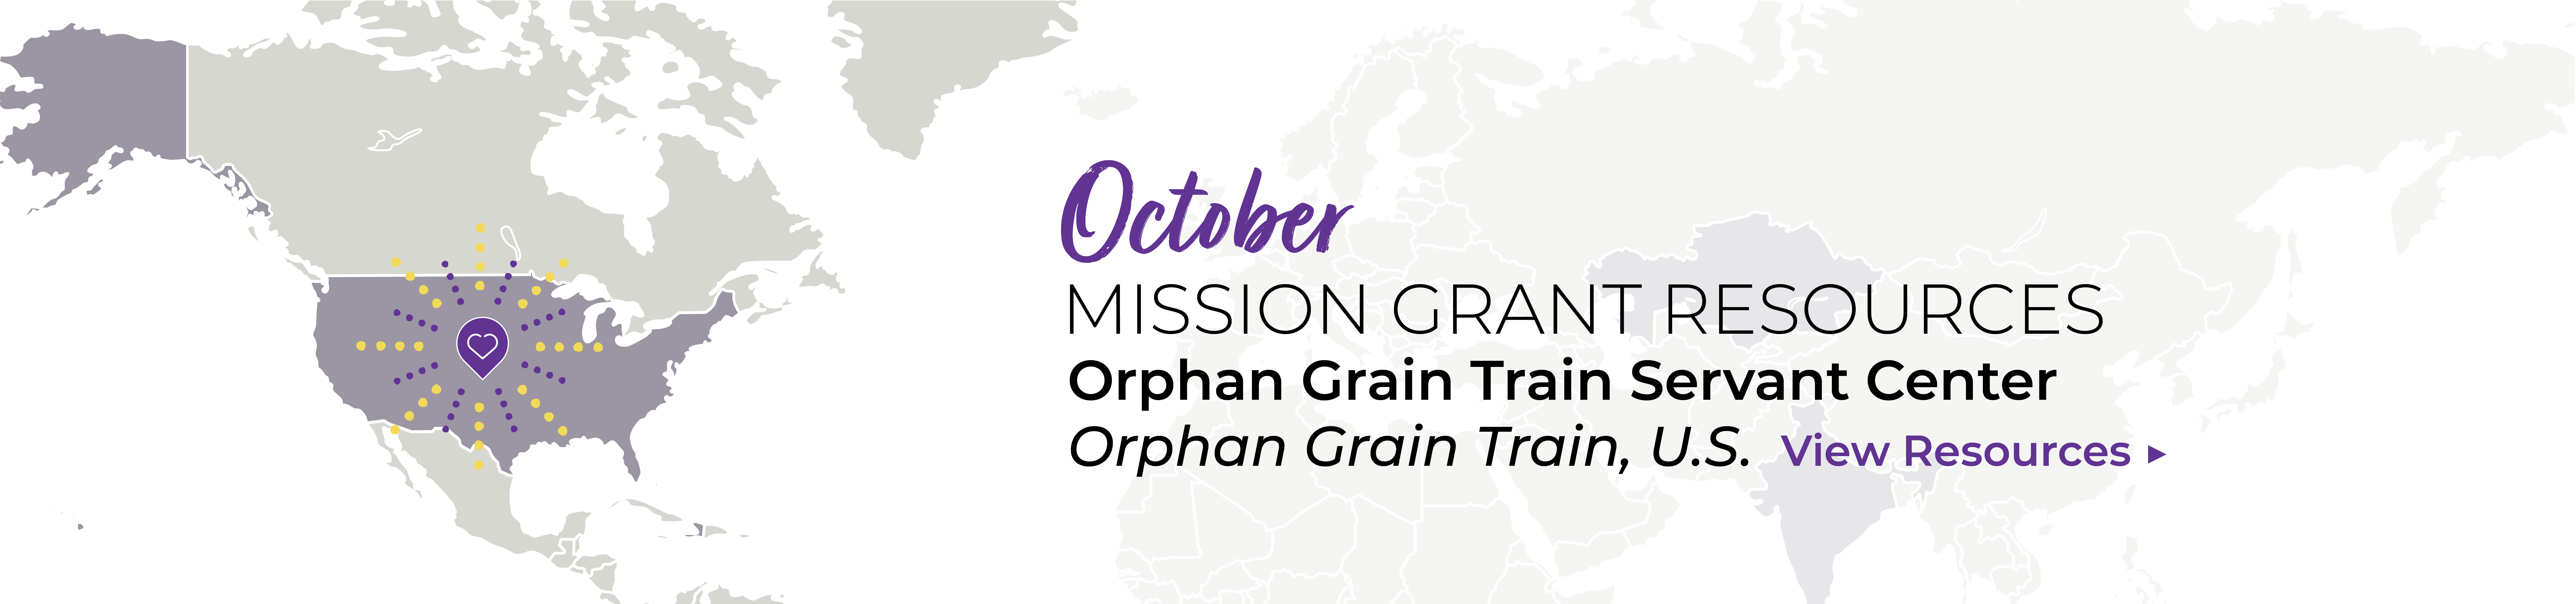 October Mission Grant Resources: Orphan Grain Train Servant Center. View Resources.